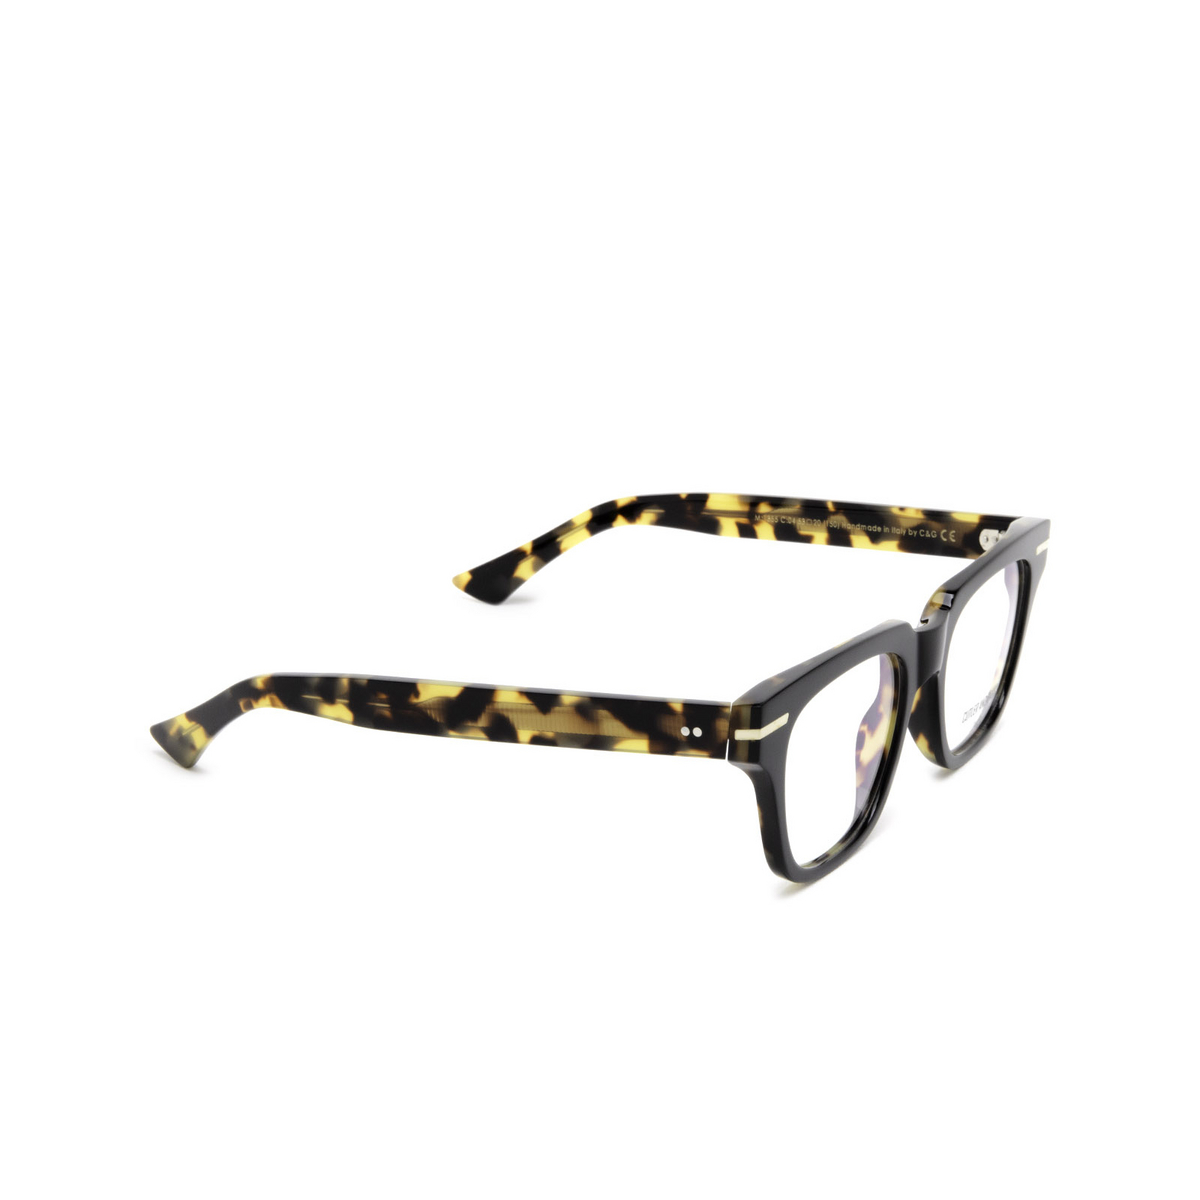 Cutler and Gross 1355 Eyeglasses 04 Black Taxi on Camo - three-quarters view